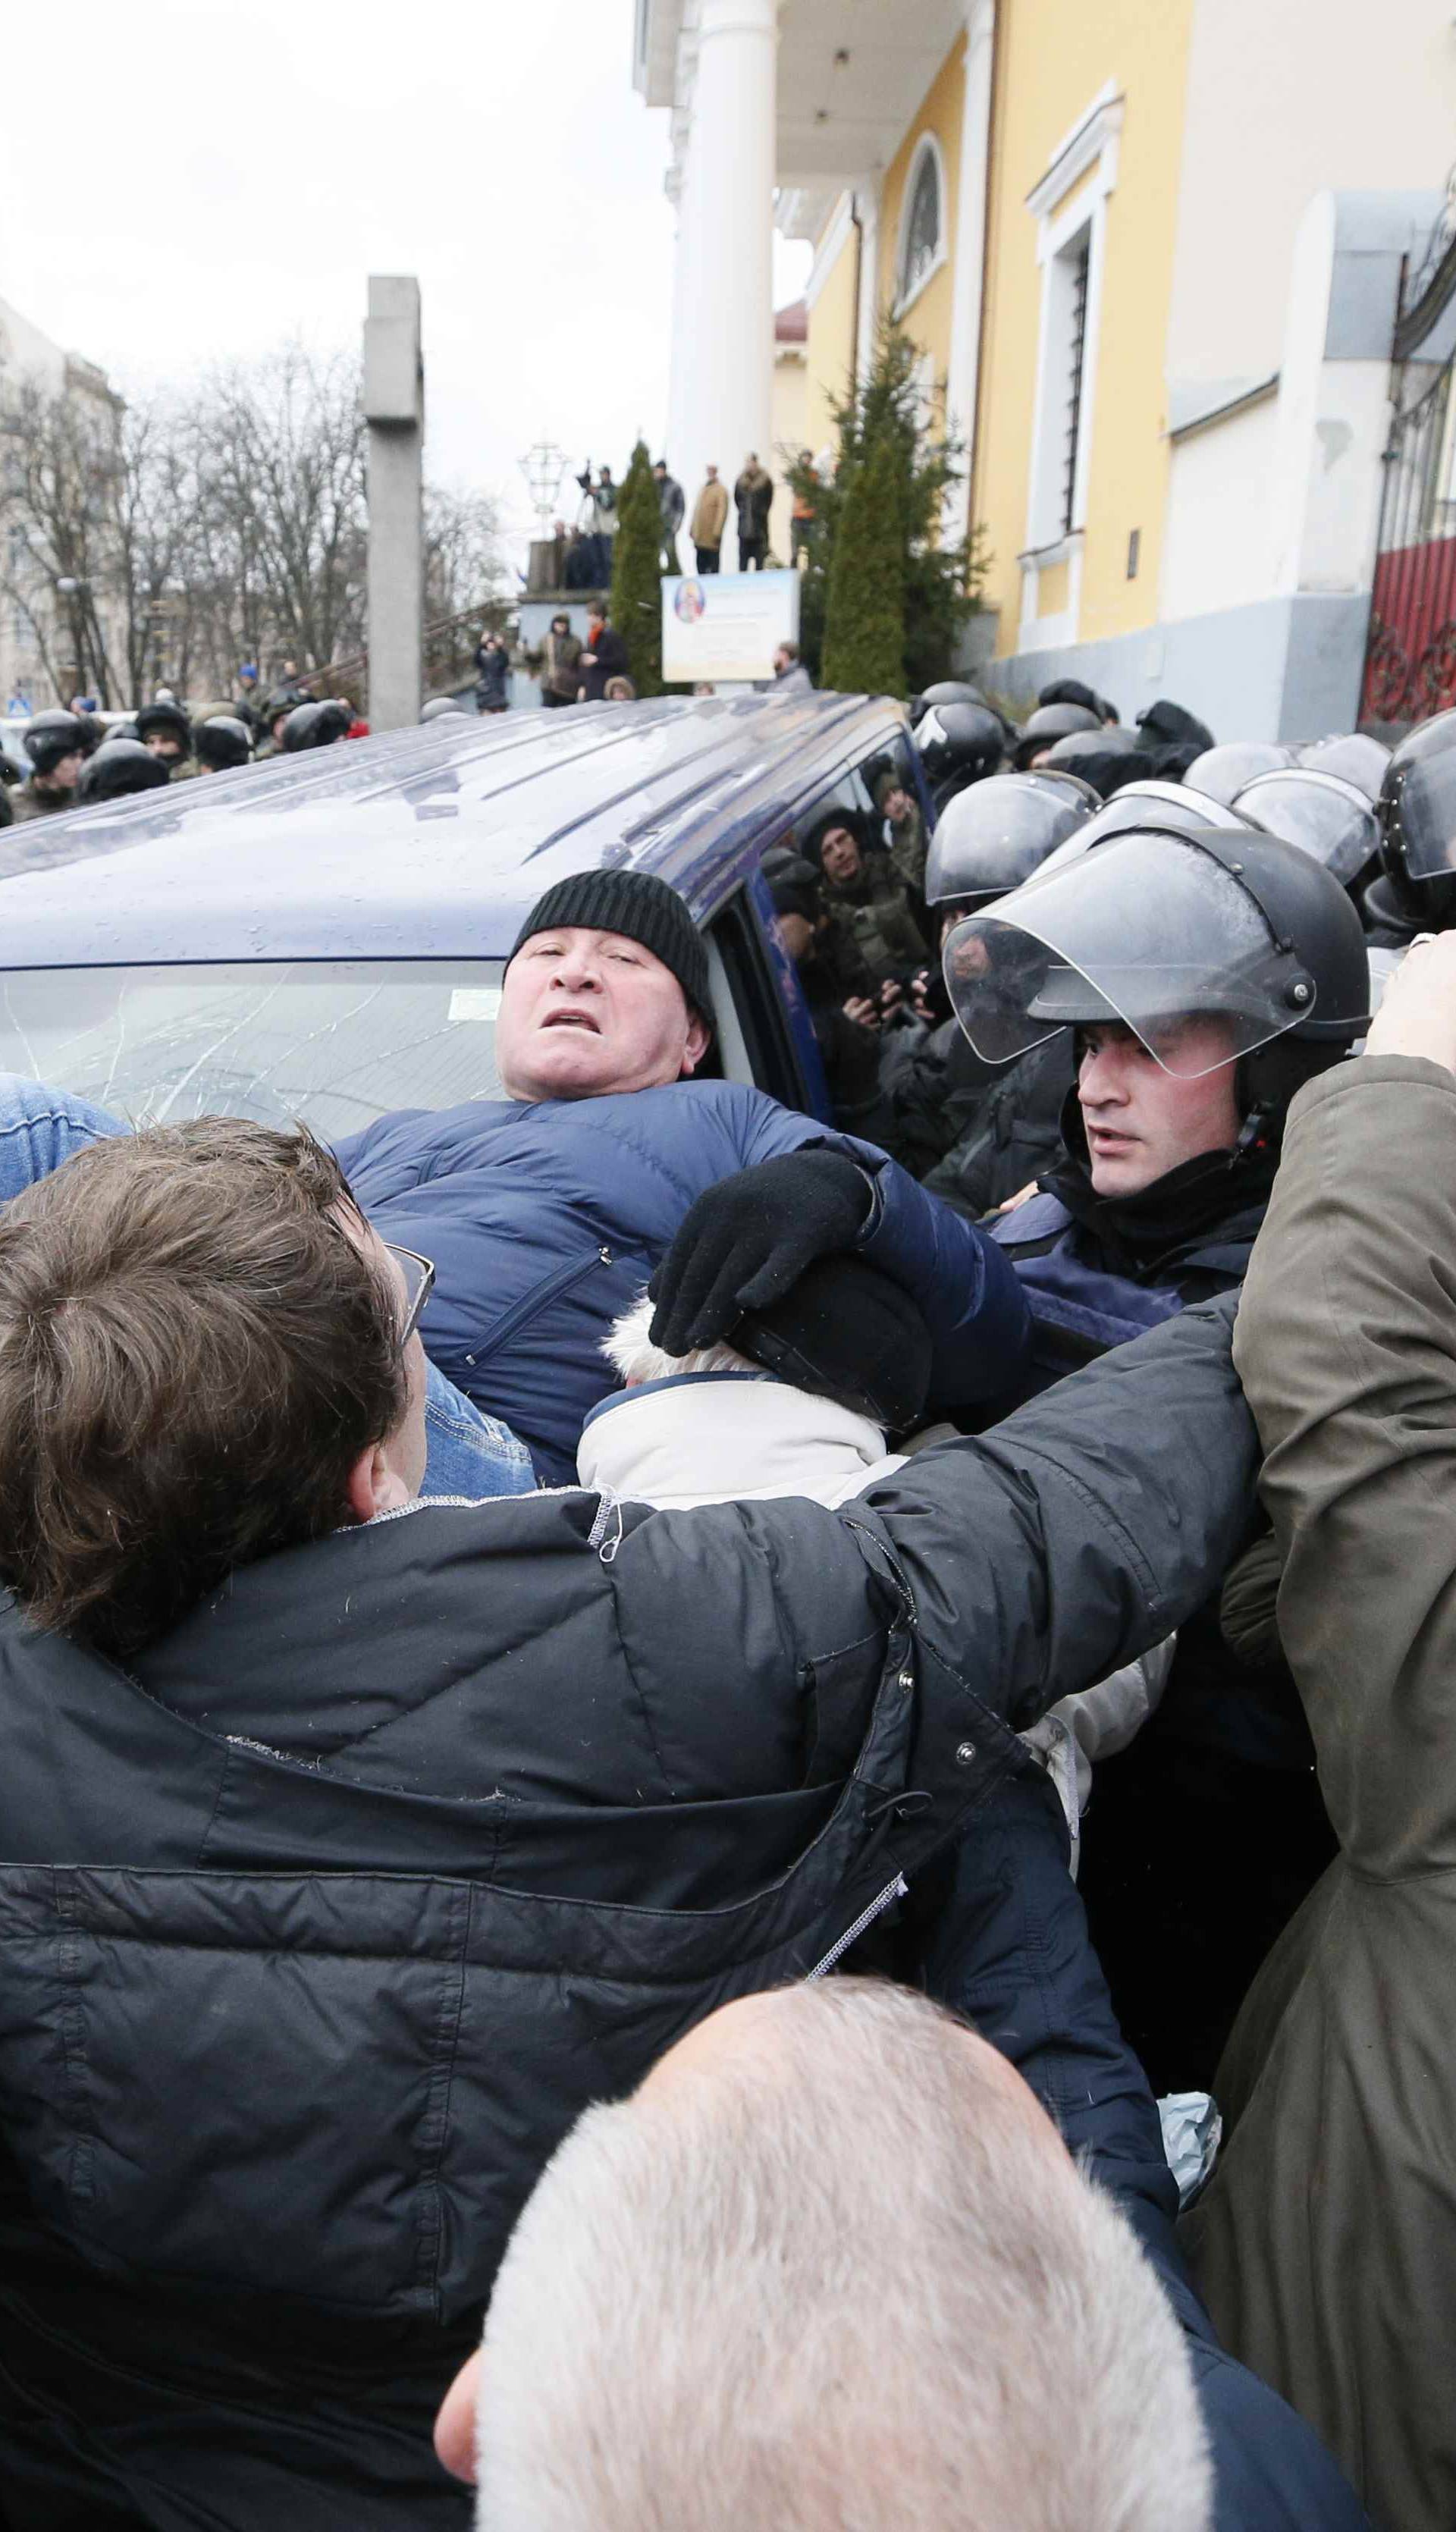 Supporters of Georgian former President Mikheil Saakashvili clash with police officers guarding a car carrying Saakashvili onboard, in Kiev